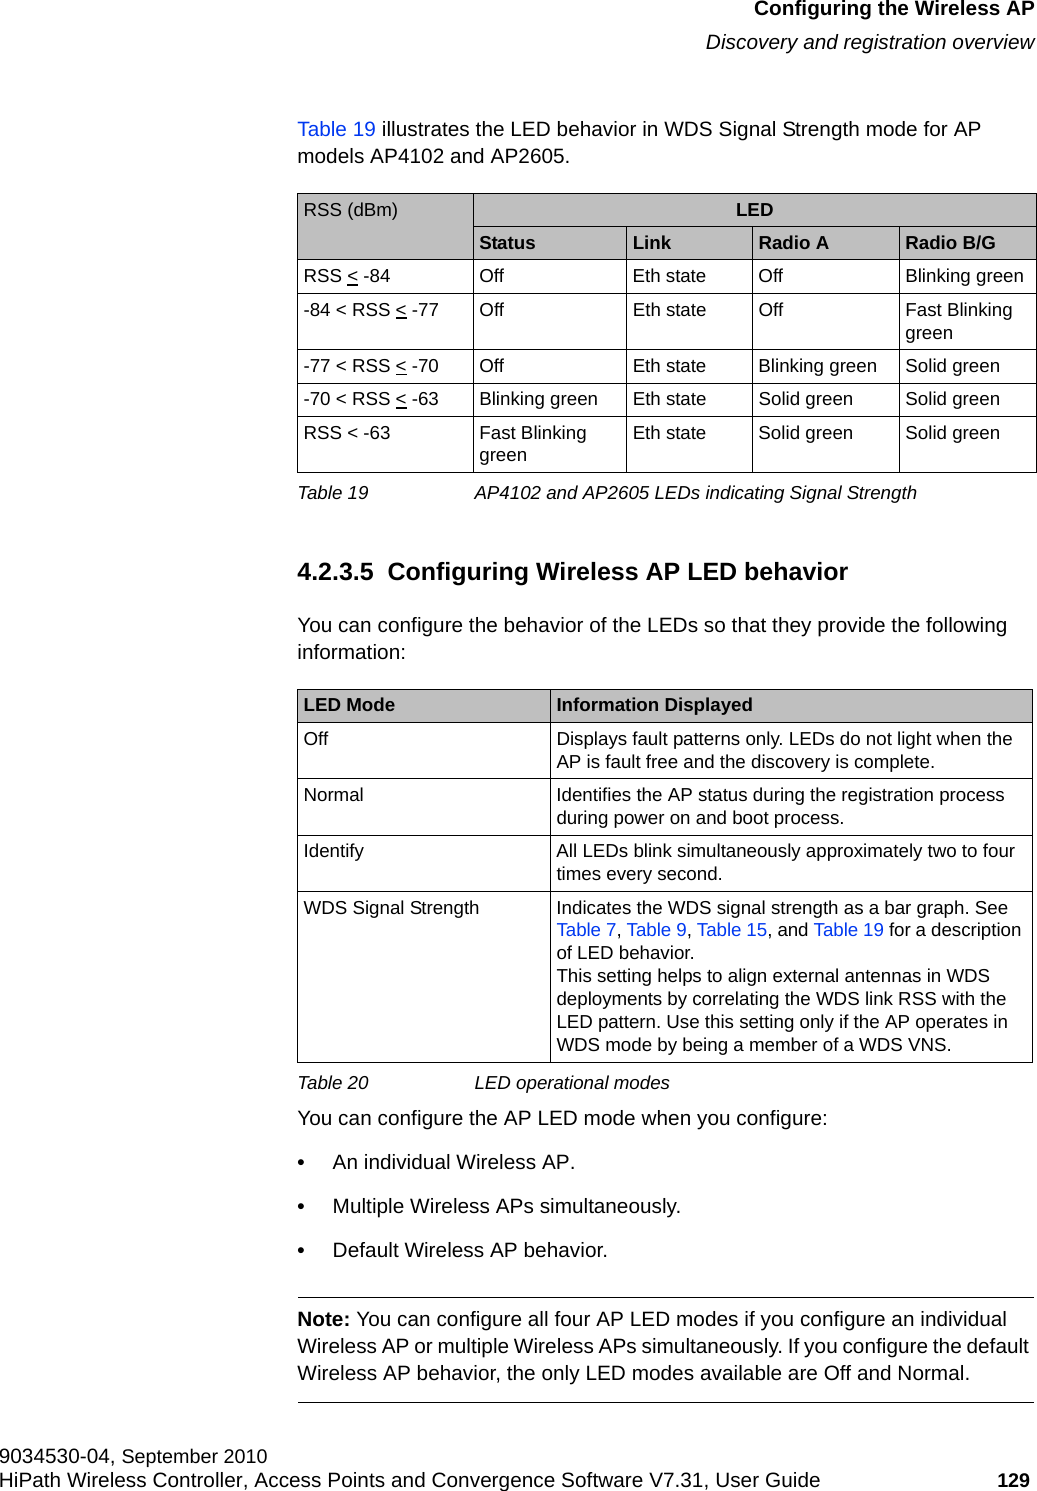 hwc_apstartup.fmConfiguring the Wireless APDiscovery and registration overview9034530-04, September 2010HiPath Wireless Controller, Access Points and Convergence Software V7.31, User Guide 129         Table 19 illustrates the LED behavior in WDS Signal Strength mode for AP models AP4102 and AP2605.4.2.3.5  Configuring Wireless AP LED behaviorYou can configure the behavior of the LEDs so that they provide the following information:You can configure the AP LED mode when you configure:•An individual Wireless AP.•Multiple Wireless APs simultaneously.•Default Wireless AP behavior.Note: You can configure all four AP LED modes if you configure an individual Wireless AP or multiple Wireless APs simultaneously. If you configure the default Wireless AP behavior, the only LED modes available are Off and Normal.RSS (dBm) LEDStatus Link Radio A Radio B/GRSS &lt; -84 Off Eth state Off Blinking green-84 &lt; RSS &lt; -77 Off Eth state Off Fast Blinking green-77 &lt; RSS &lt; -70 Off Eth state Blinking green Solid green-70 &lt; RSS &lt; -63 Blinking green Eth state Solid green Solid greenRSS &lt; -63 Fast Blinking green Eth state Solid green Solid greenTable 19 AP4102 and AP2605 LEDs indicating Signal StrengthLED Mode Information DisplayedOff Displays fault patterns only. LEDs do not light when the AP is fault free and the discovery is complete.Normal Identifies the AP status during the registration process during power on and boot process.Identify All LEDs blink simultaneously approximately two to four times every second.WDS Signal Strength Indicates the WDS signal strength as a bar graph. See Table 7, Table 9, Table 15, and Table 19 for a description of LED behavior. This setting helps to align external antennas in WDS deployments by correlating the WDS link RSS with the LED pattern. Use this setting only if the AP operates in WDS mode by being a member of a WDS VNS.Table 20 LED operational modes